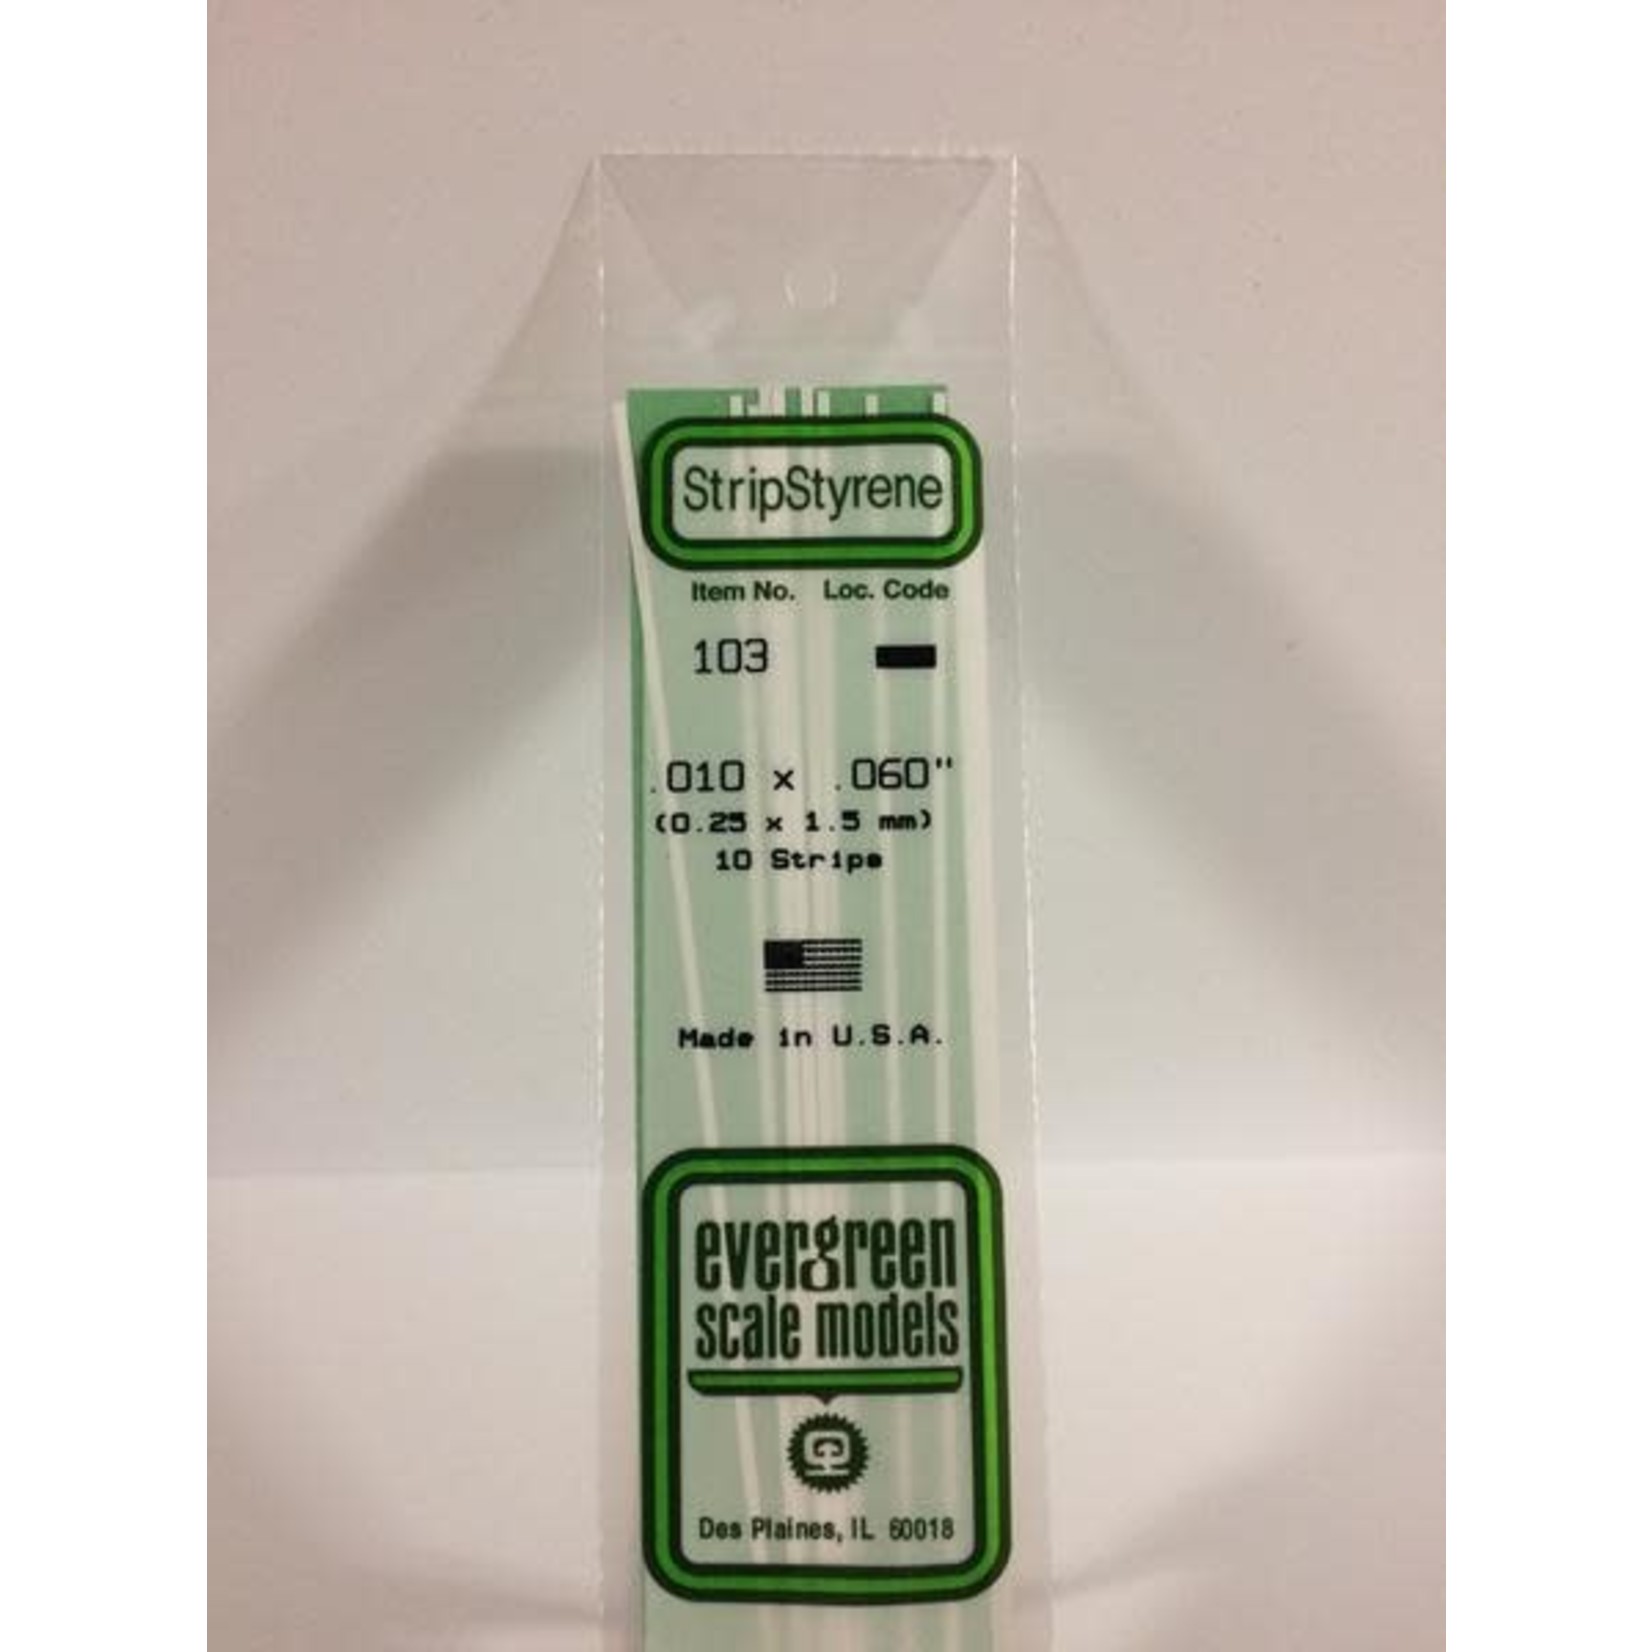 Evergreen Scale Models Evergreen 103 - .010" X .060" OPAQUE WHITE POLYSTYRENE STRIP